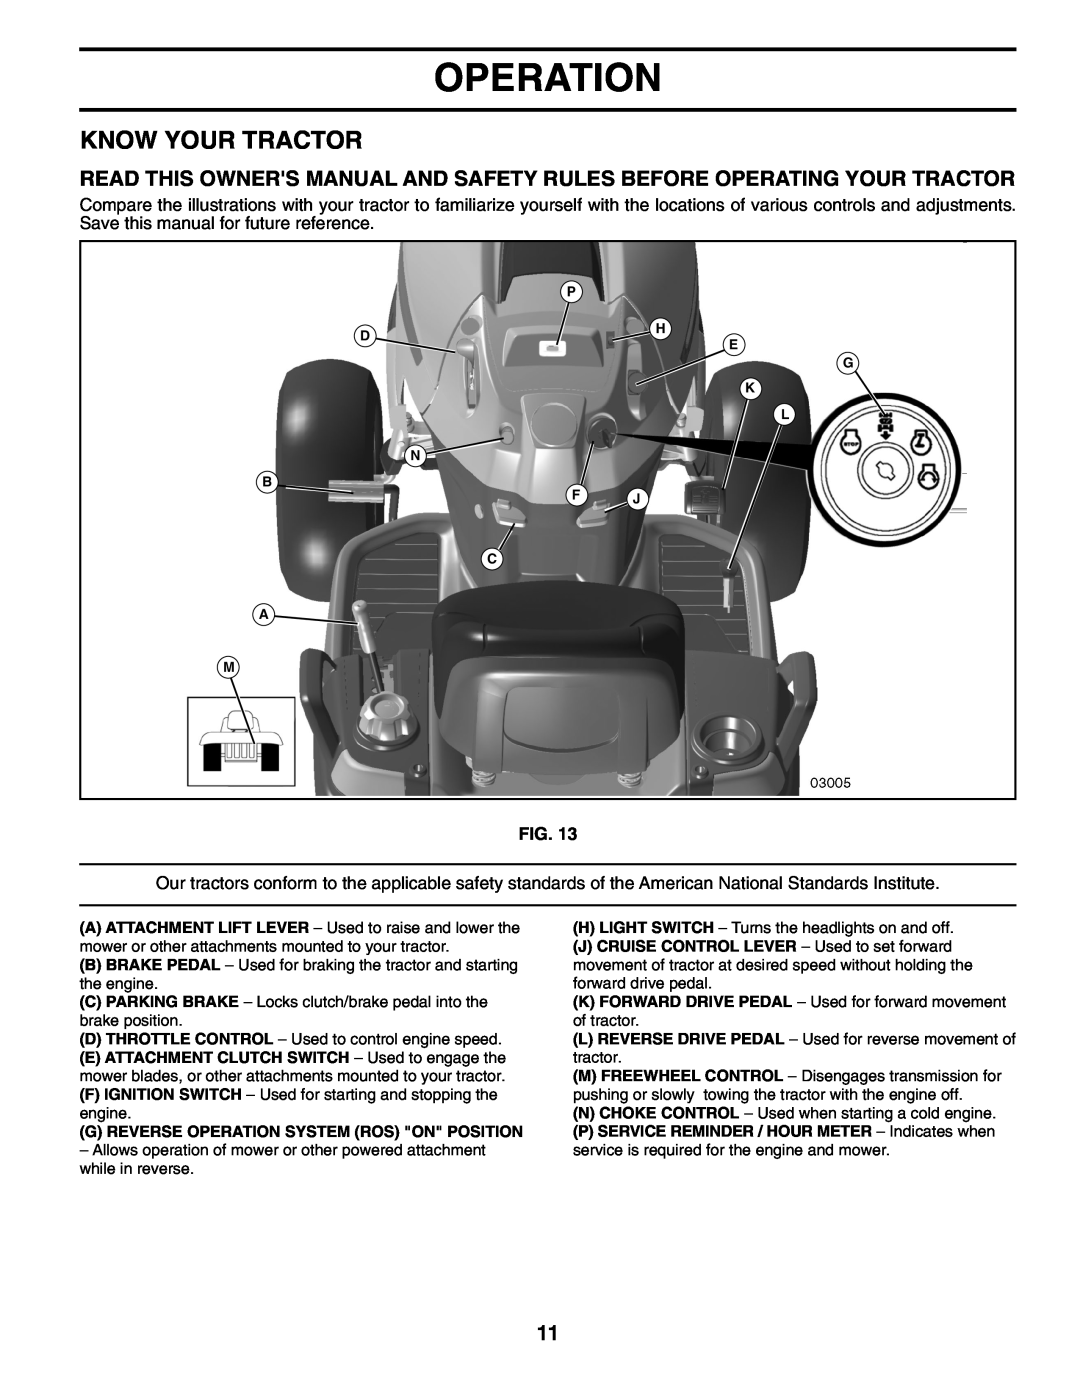 Husqvarna YTH2754XP owner manual Know Your Tractor, Operation 